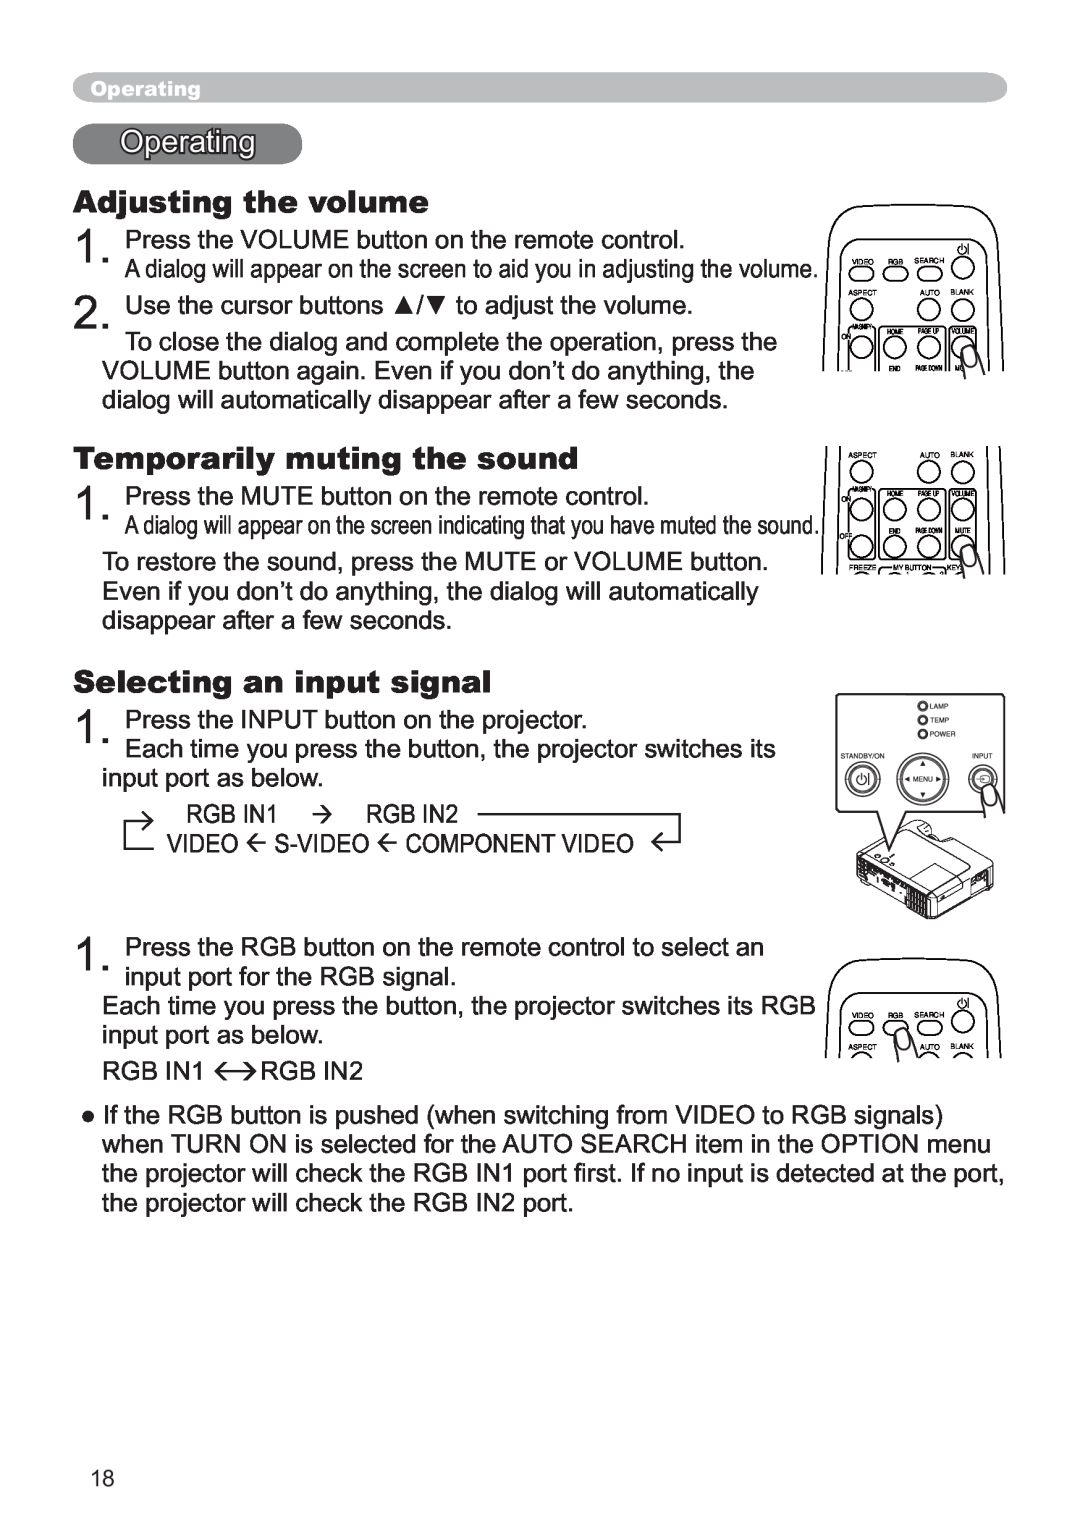 Hitachi ED-X12 user manual Operating, Adjusting the volume, Temporarily muting the sound, Selecting an input signal 